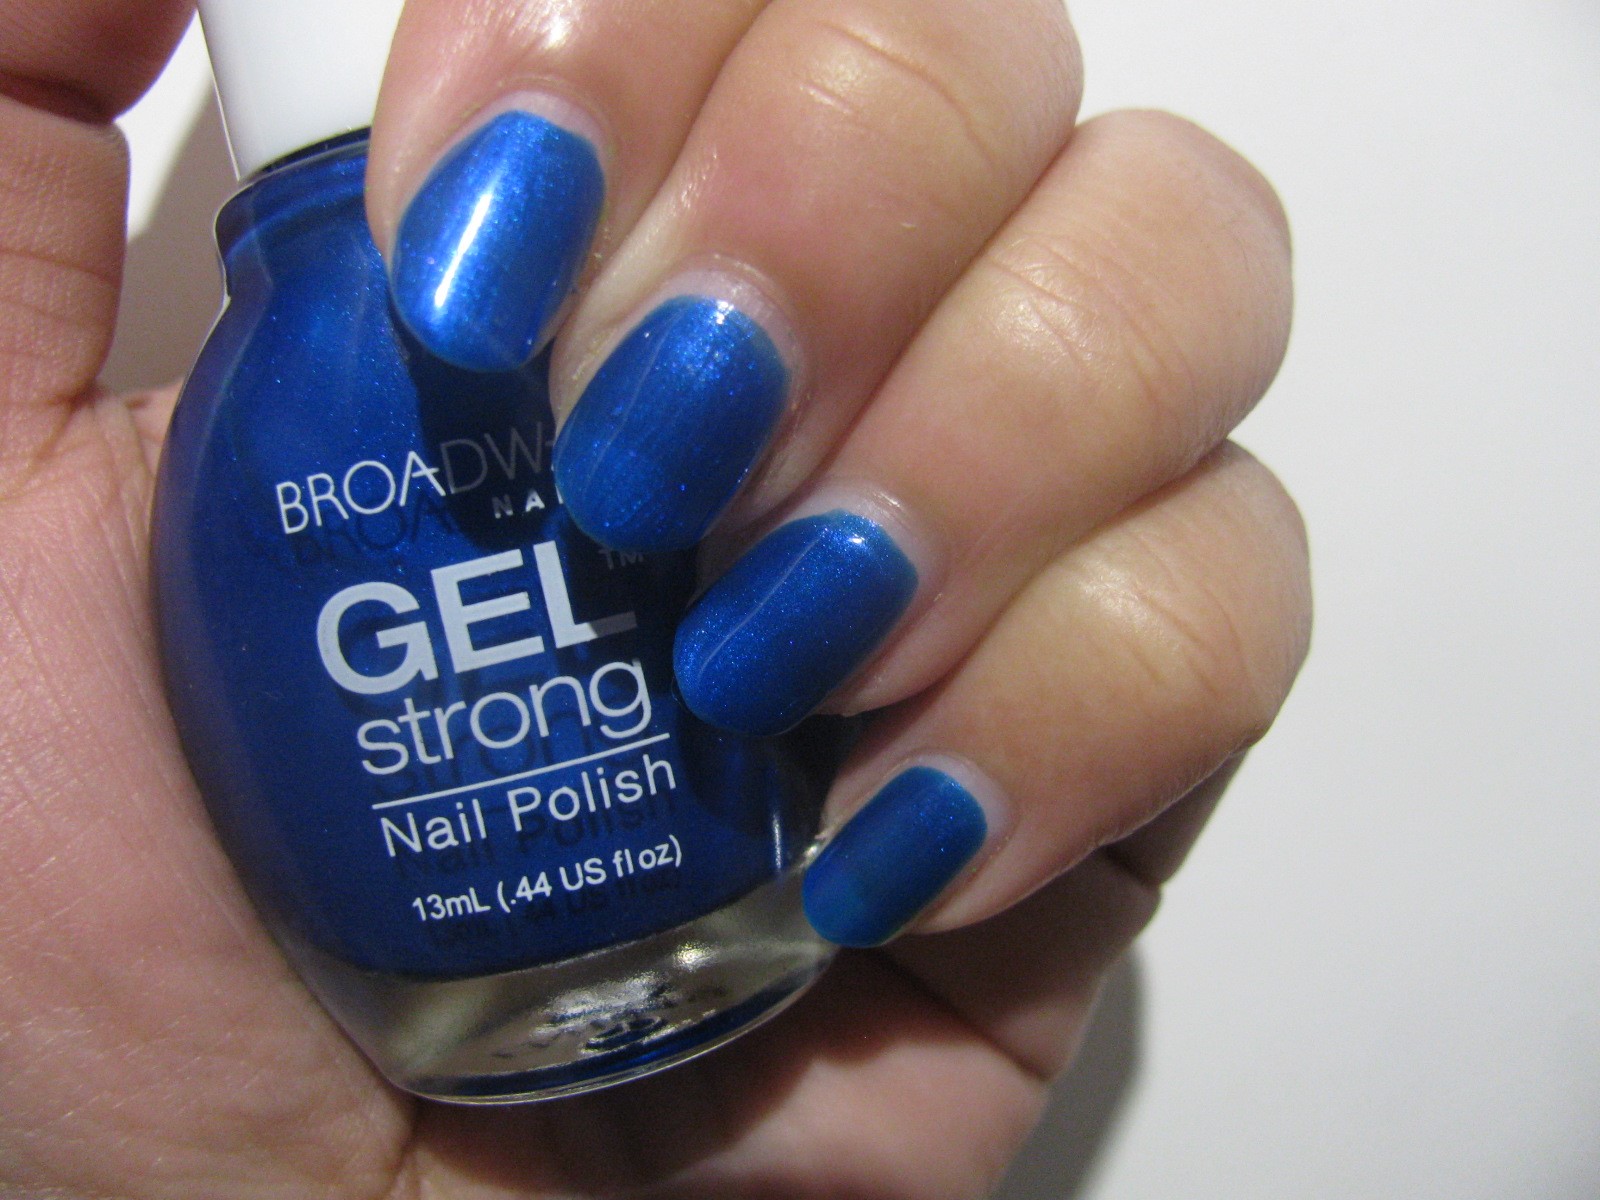 8. Broadway Nails Neon Nail Polish in Color 40 - wide 4